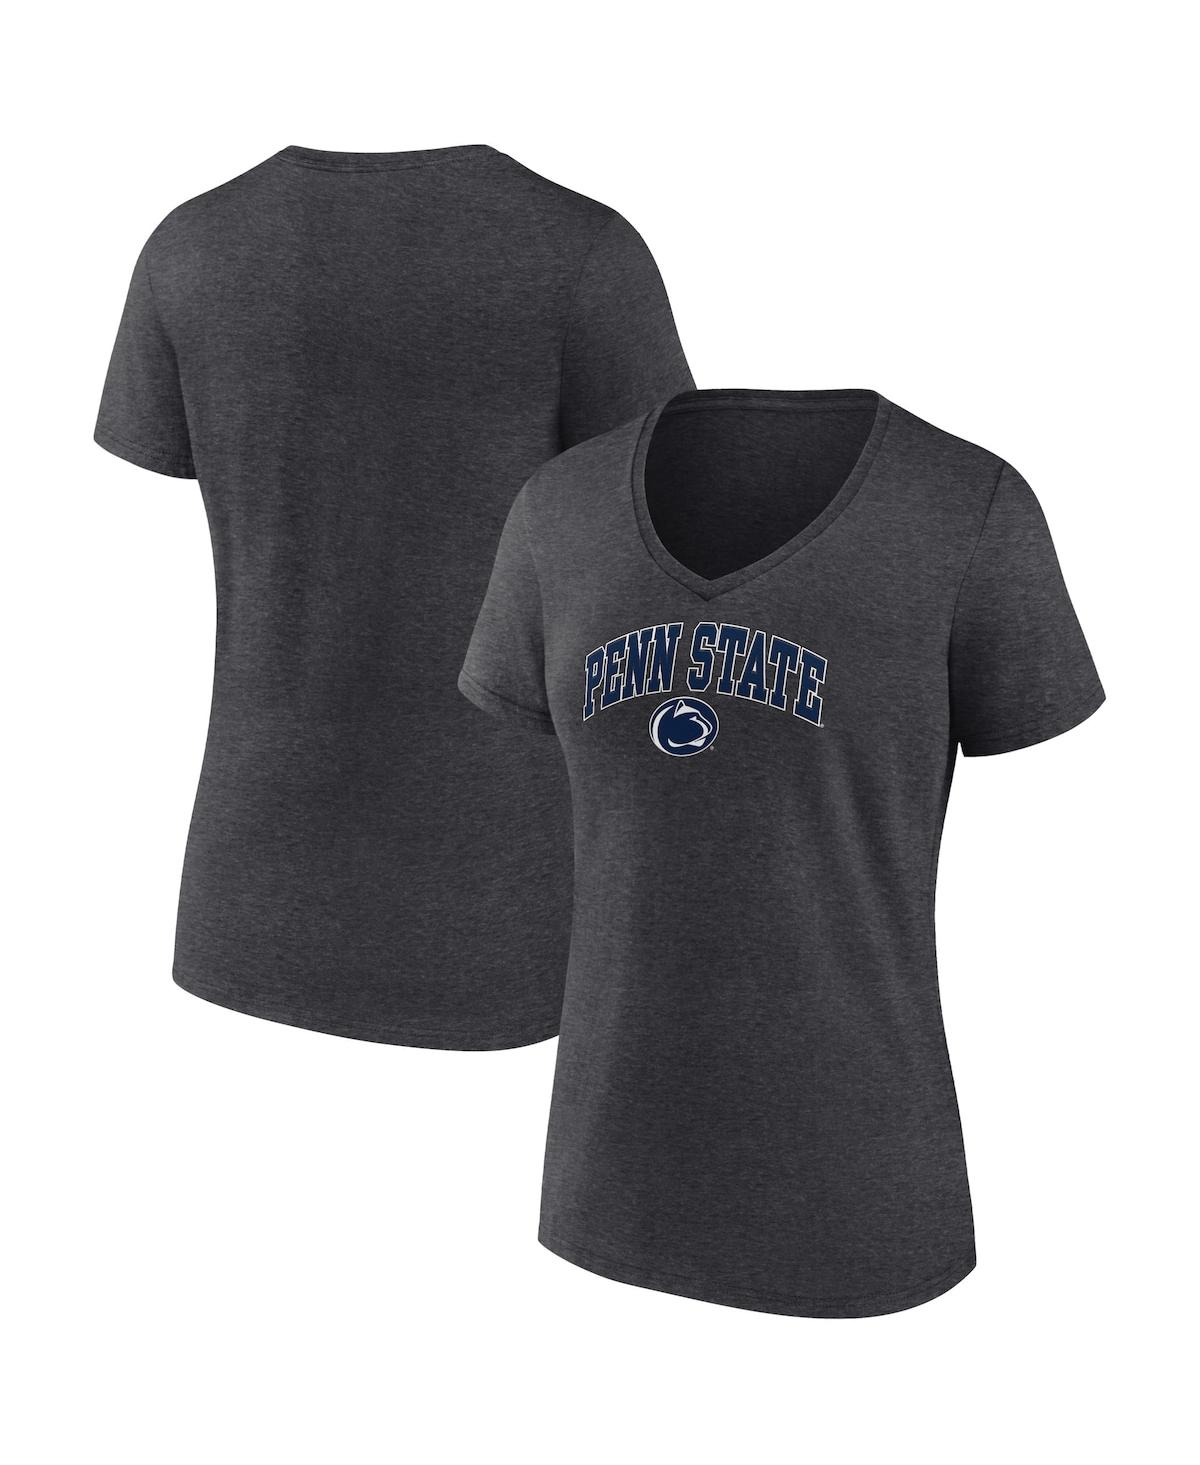 Fanatics Women's  Heather Charcoal Penn State Nittany Lions Evergreen Campus V-neck T-shirt